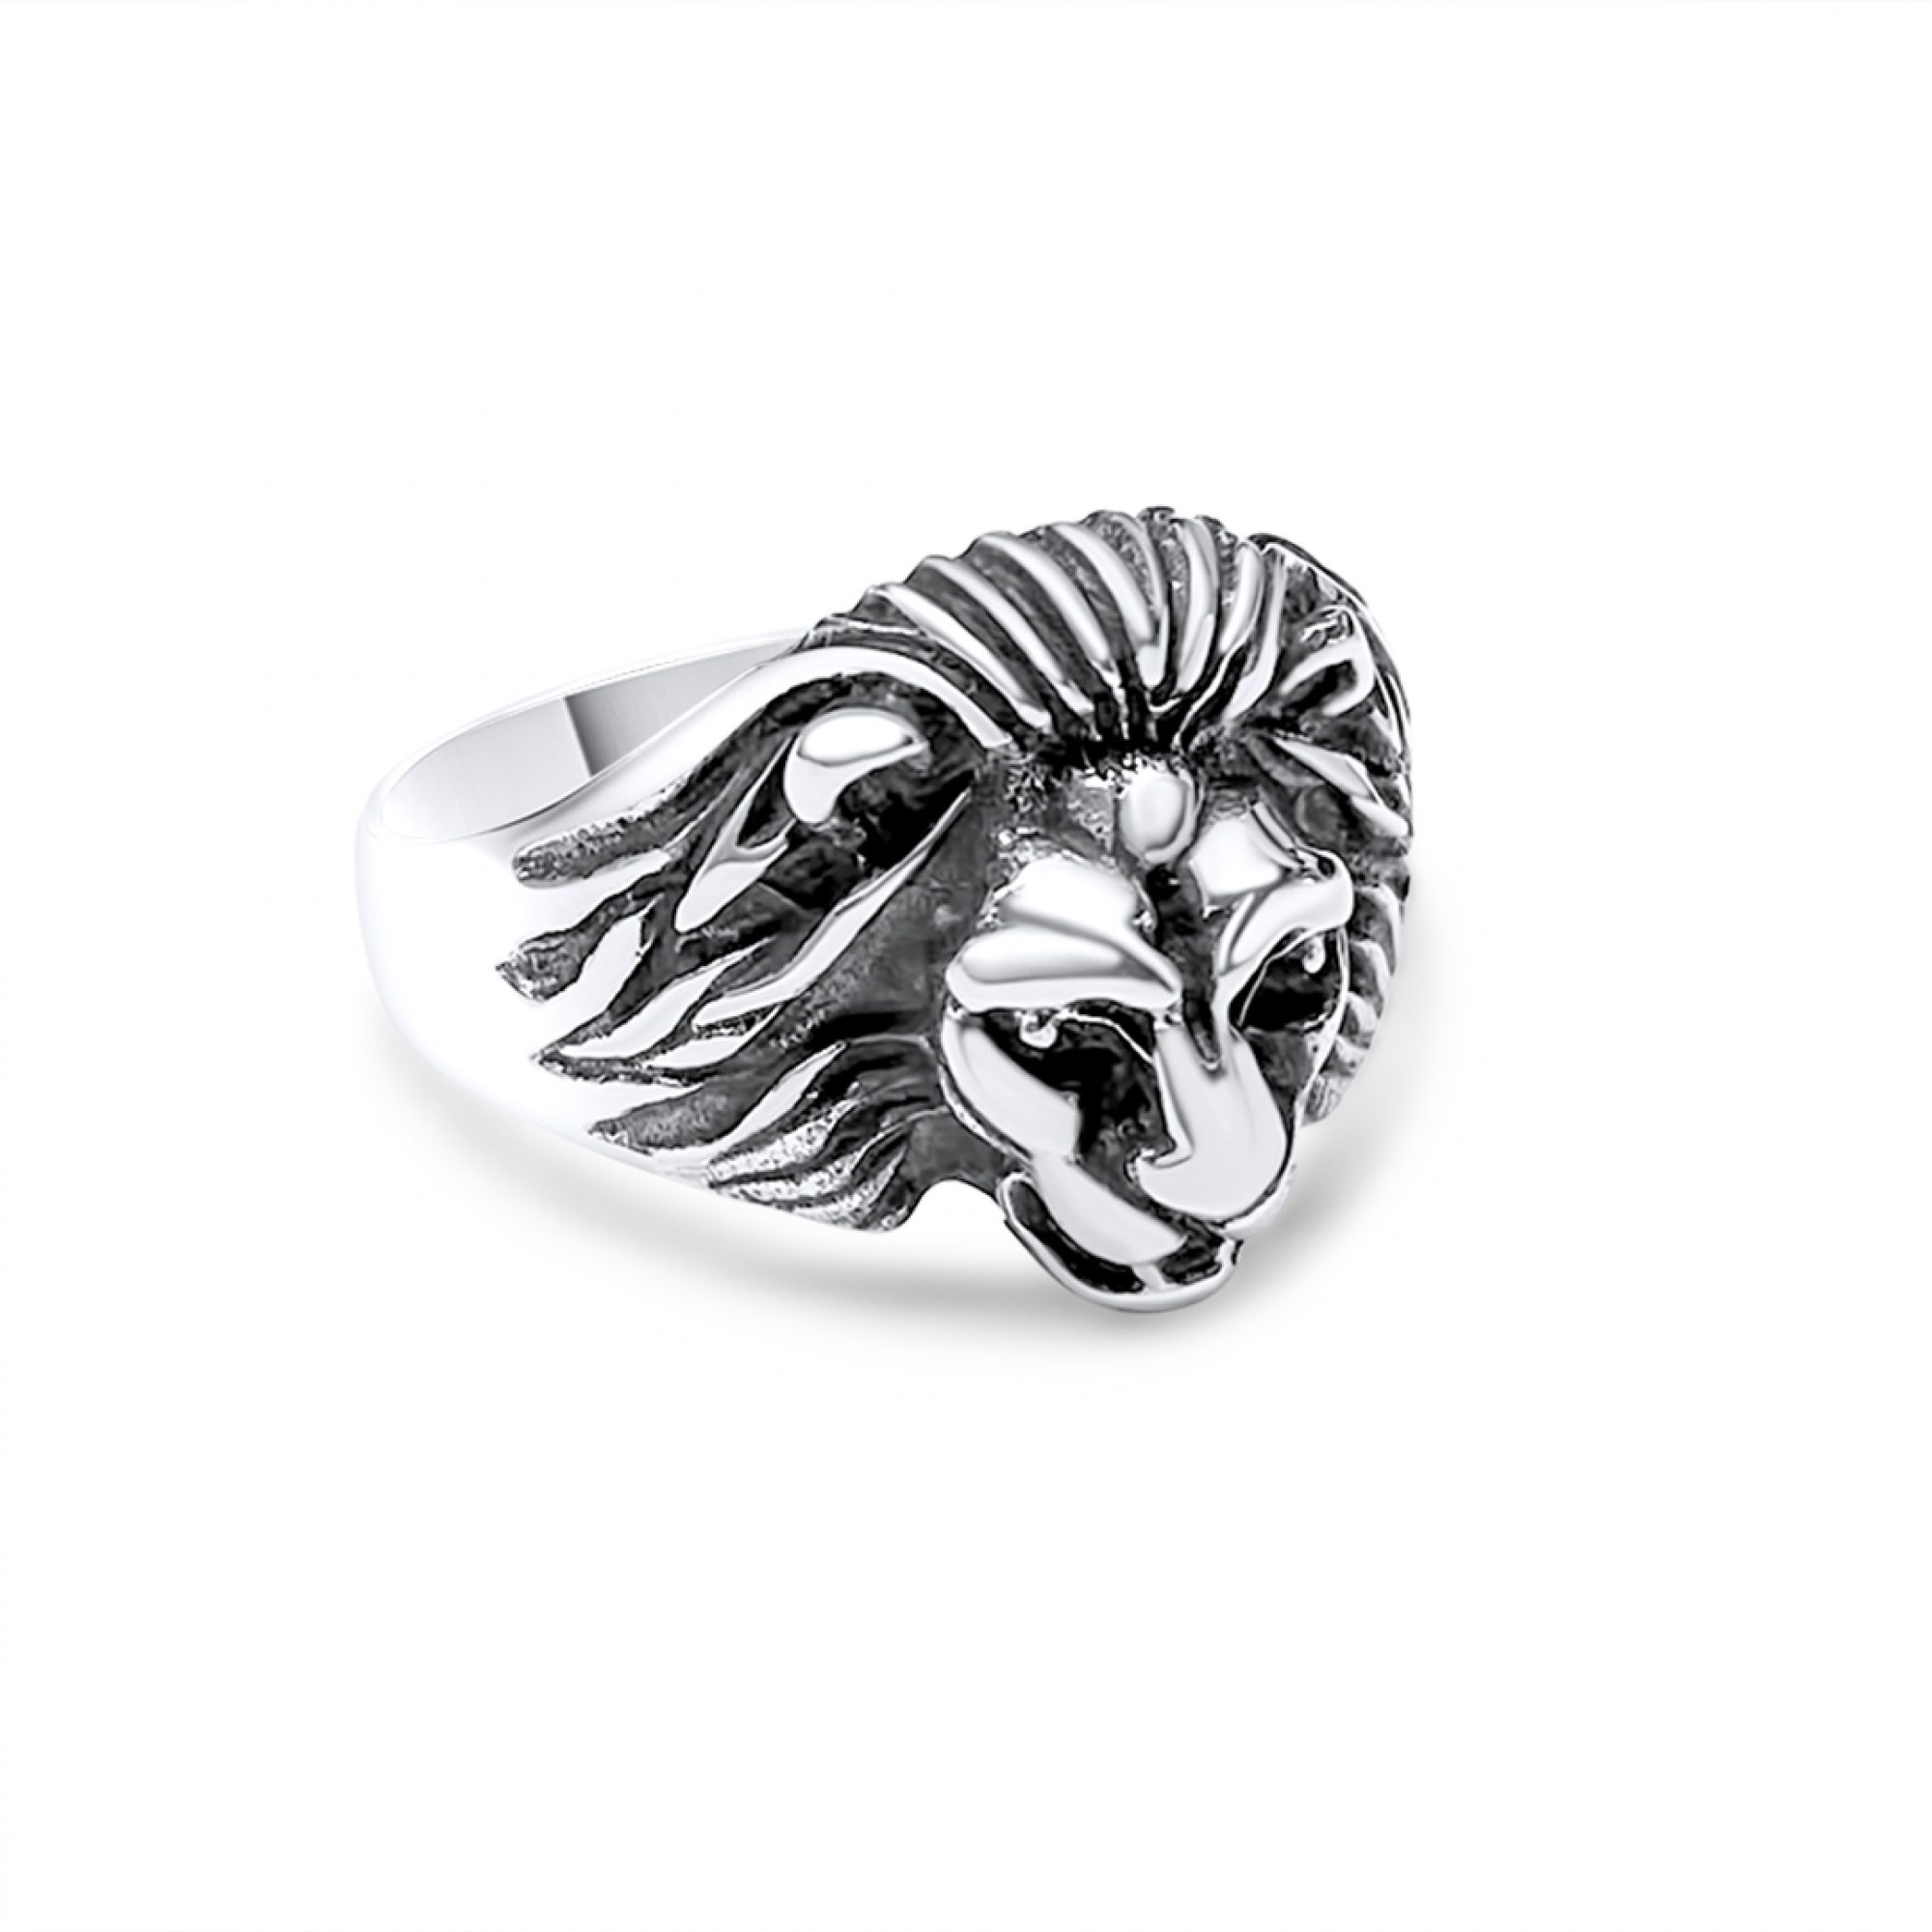 Silver lion head ring